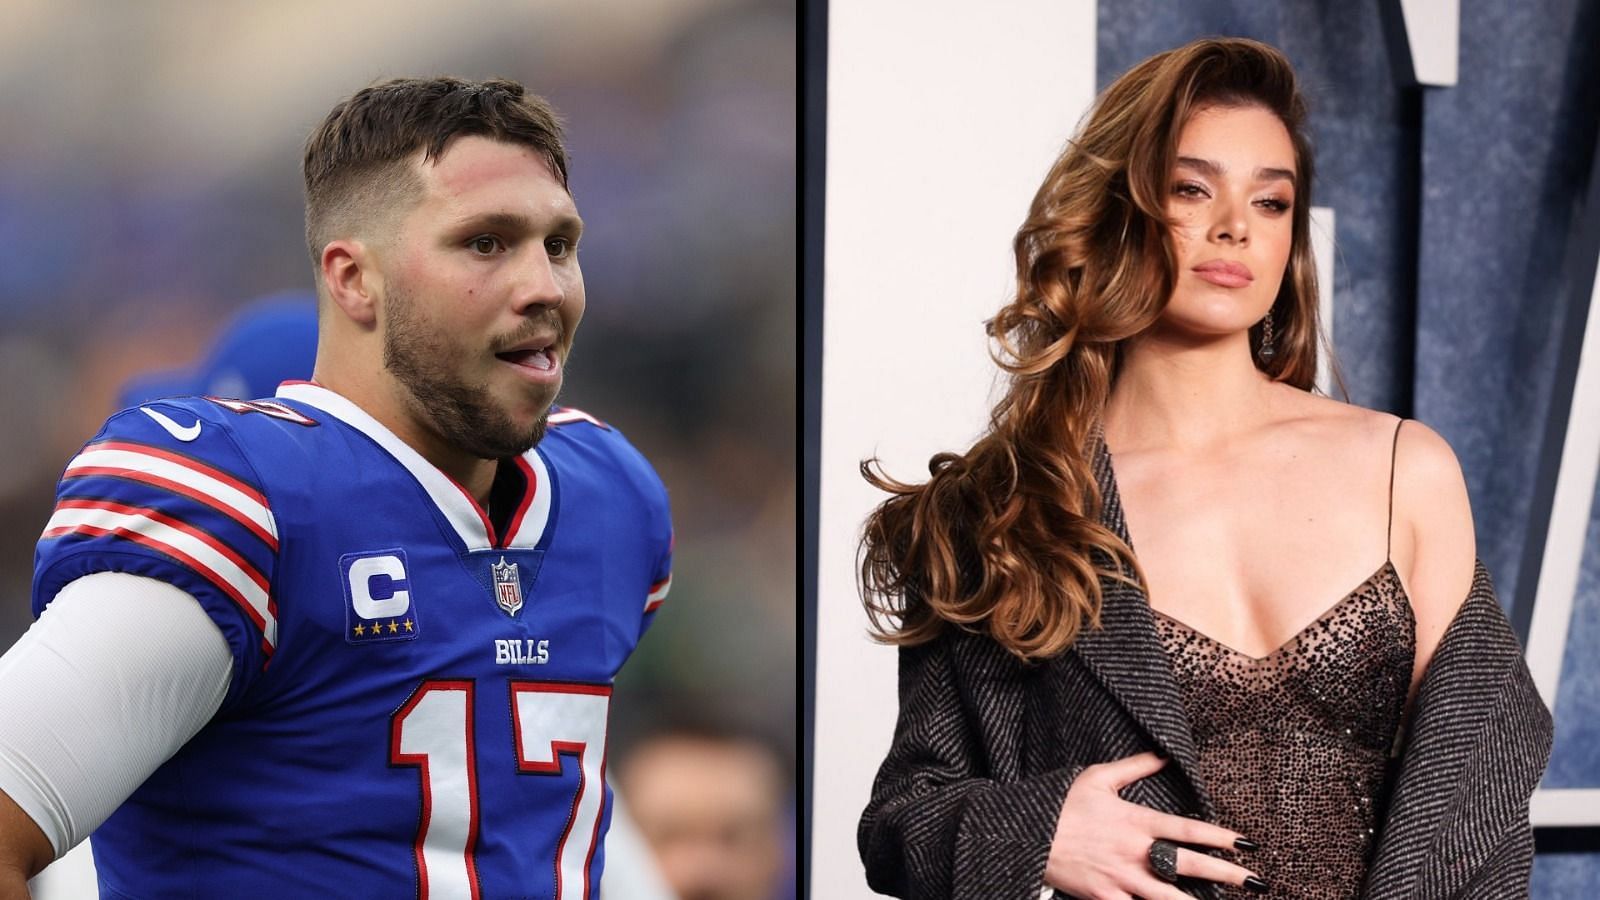 Josh Allen (L) on the viral photos of his reported love interest, actress and singer Hailee Steinfeld (R)